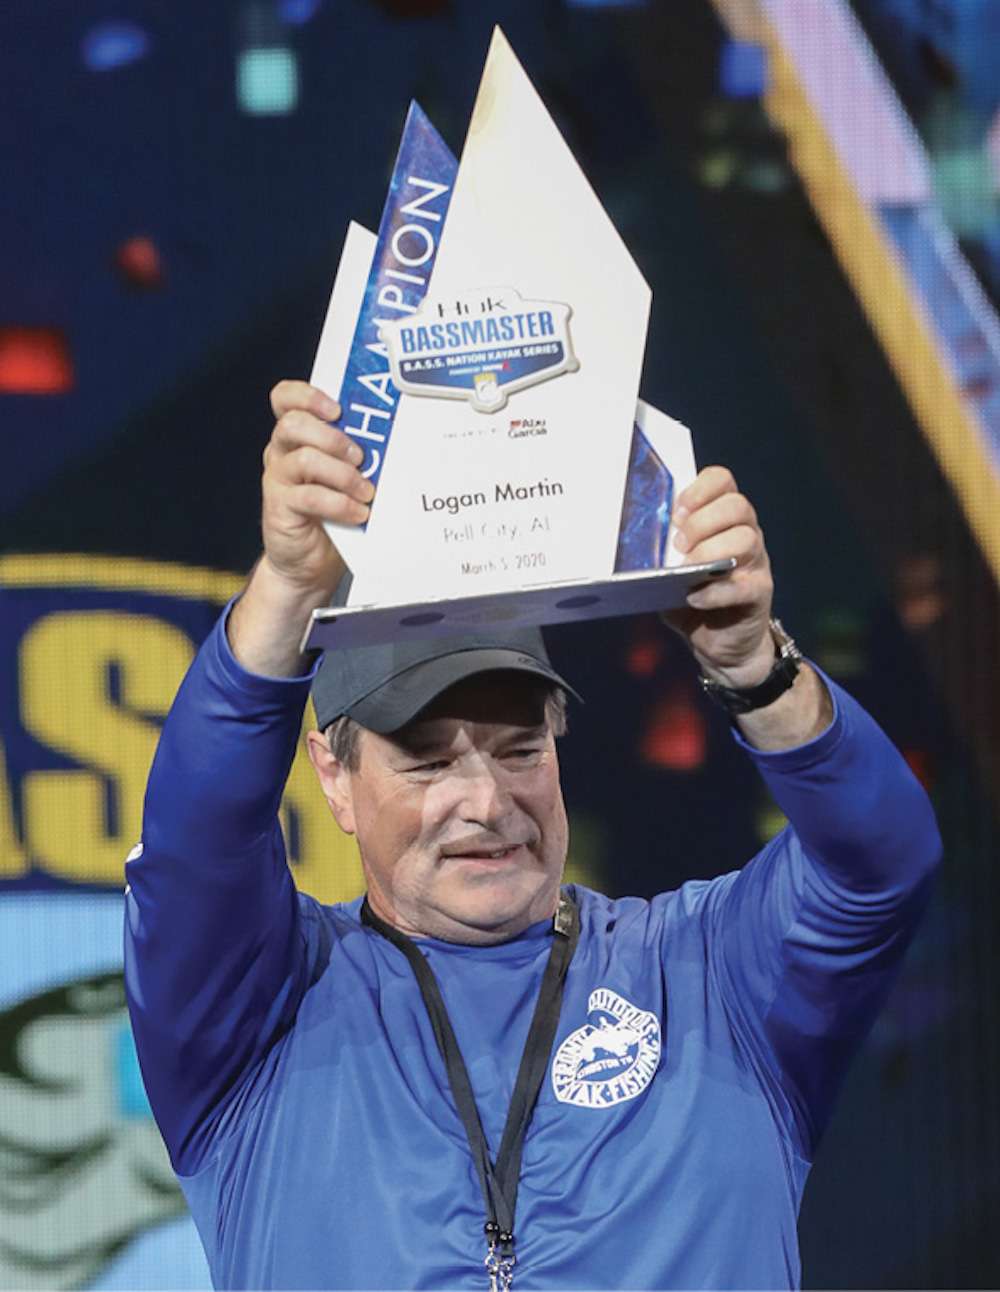 Ultimately, Jim Davis of Knoxville, Tenn., was announced the winner and received his trophy in front of thousands of cheering Classic fans. He won $10,000.
<br><br>
This suspense was made possible by the B.A.S.S. Nation Kayak Seriesâ âcatch-photograph-releaseâ method of recording the catch. Anglers use their phone to take a picture of their bass on an approved measuring board and submit it to TourneyX.com, which tallies all the catches and standings. Anglers and the general public can view the standings in real time â typically until an hour before the fishing period ends and the standings go offline.
<br><br>
While many anglers struggled (55 anglers submitted no fish, while 58 anglers posted five-fish limits), Davis said he caught around 40 fish. His five biggest (three largemouth and two spots) totaled 87.5 inches, providing a comfortable margin over second-place Mark Edwards of West Virginia, with 84.75 inches. Third-place finisher Jonathan Lessman of Alabama caught 84.75 inches on a white spinnerbait, but Edwards had a bigger bass in his virtual livewell to break the tie.
<br><br>
Davis caught his fish on a Storm Arashi Spinbait, a spybait and a lure type usually associated with deeper, suspended fish. Yet Davis used it in shallow water along a rocky section of Logan Martinâs Clear Creek.
âIâm a one-hook guy and usually throw a Senko,â said Davis, who fished from an Old Town Predator PDL. âThe spybait was the only kind of lure I had that was the size of the baitfish the bass were eating.â
<br><br>
The tournament was hosted by the Pell City Chamber of Commerce.
